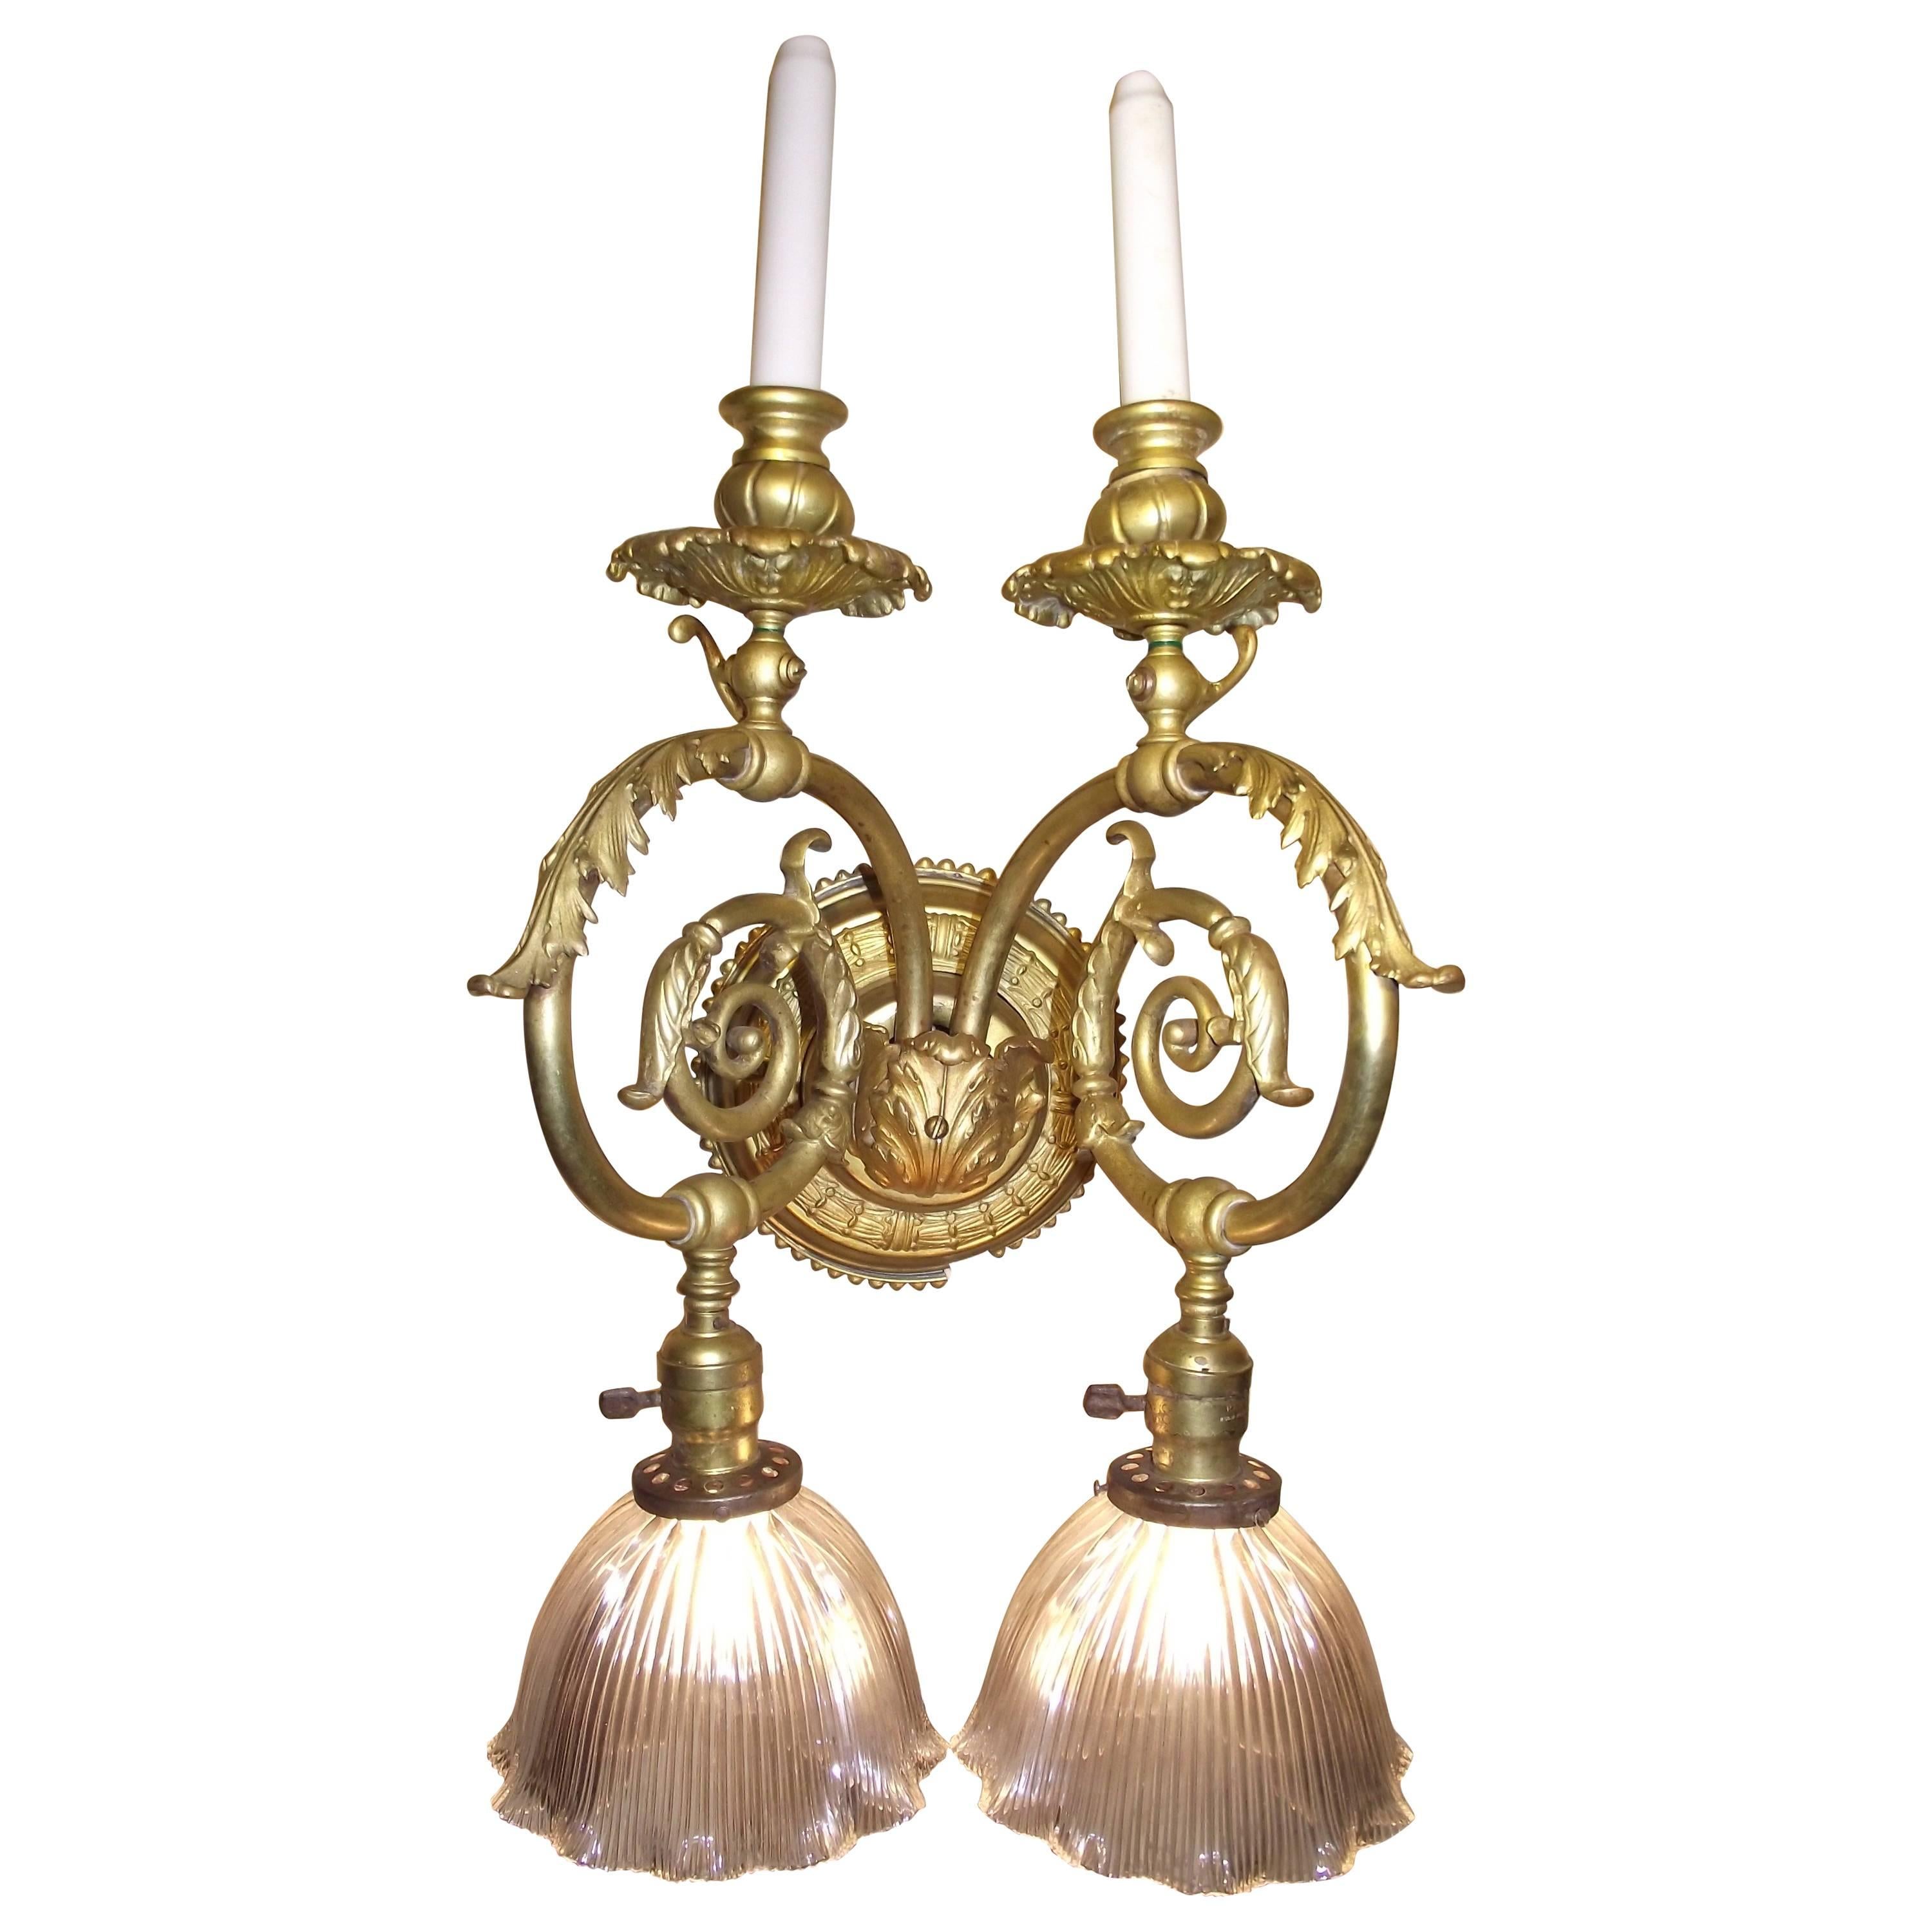 Victorian Gas/Electric Sconce Light, Large Original Working Condition For Sale